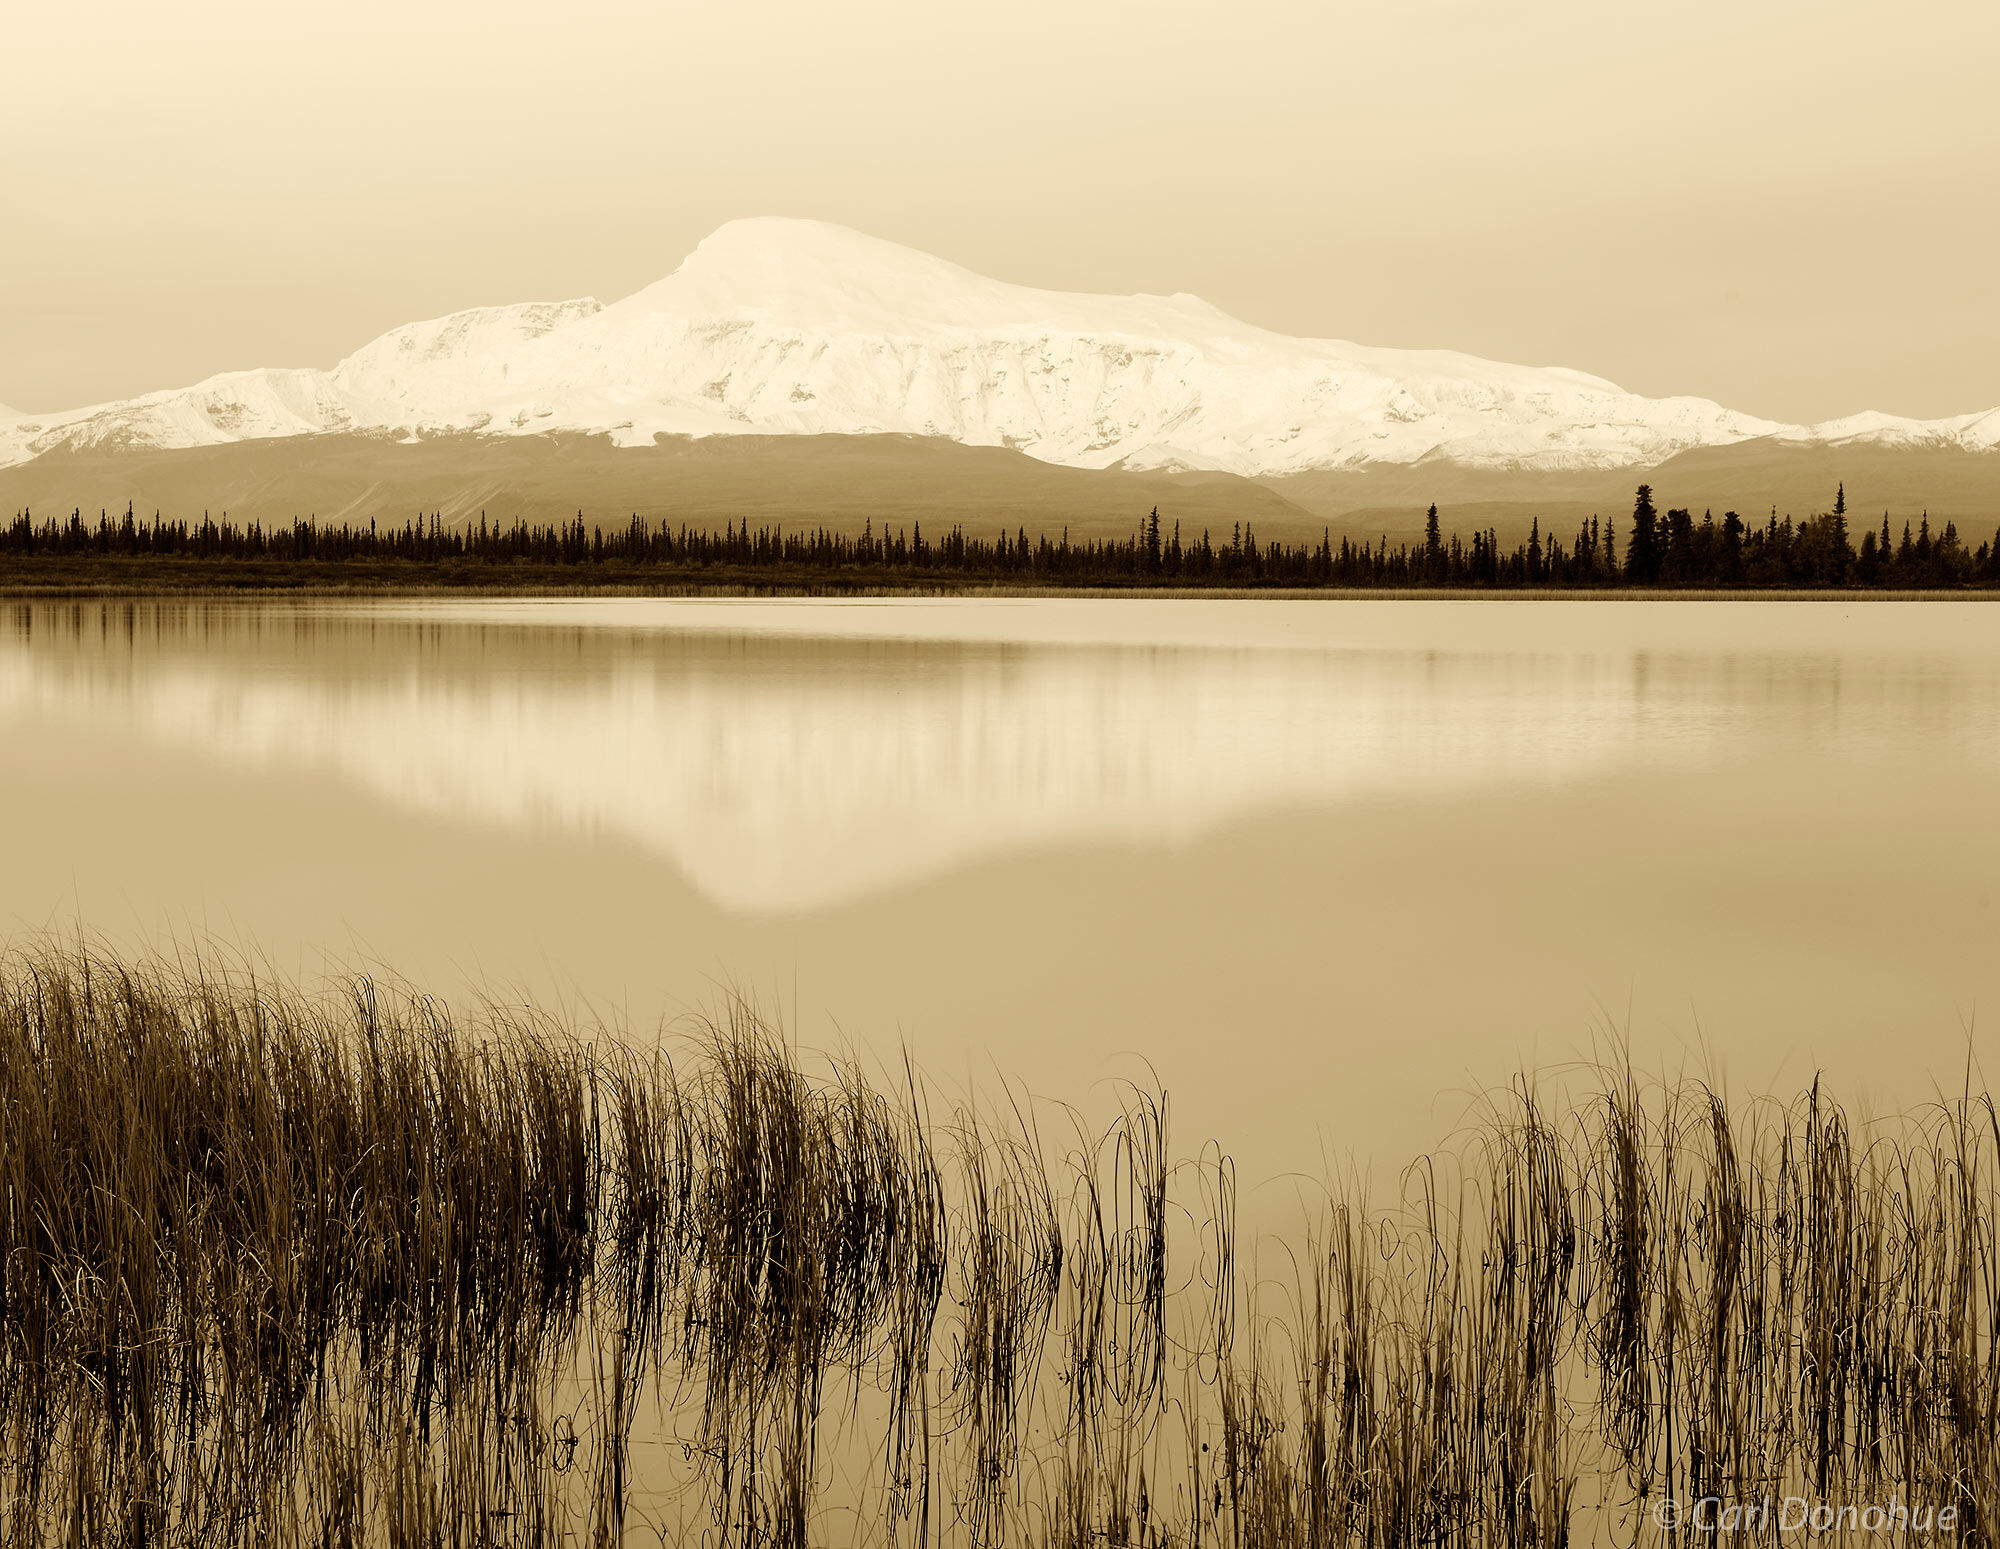 Black and white Alaska landscape photo, Mount Sanford and reflection in a kettle pond, Wrangell-St. Elias National Park and Preserve...